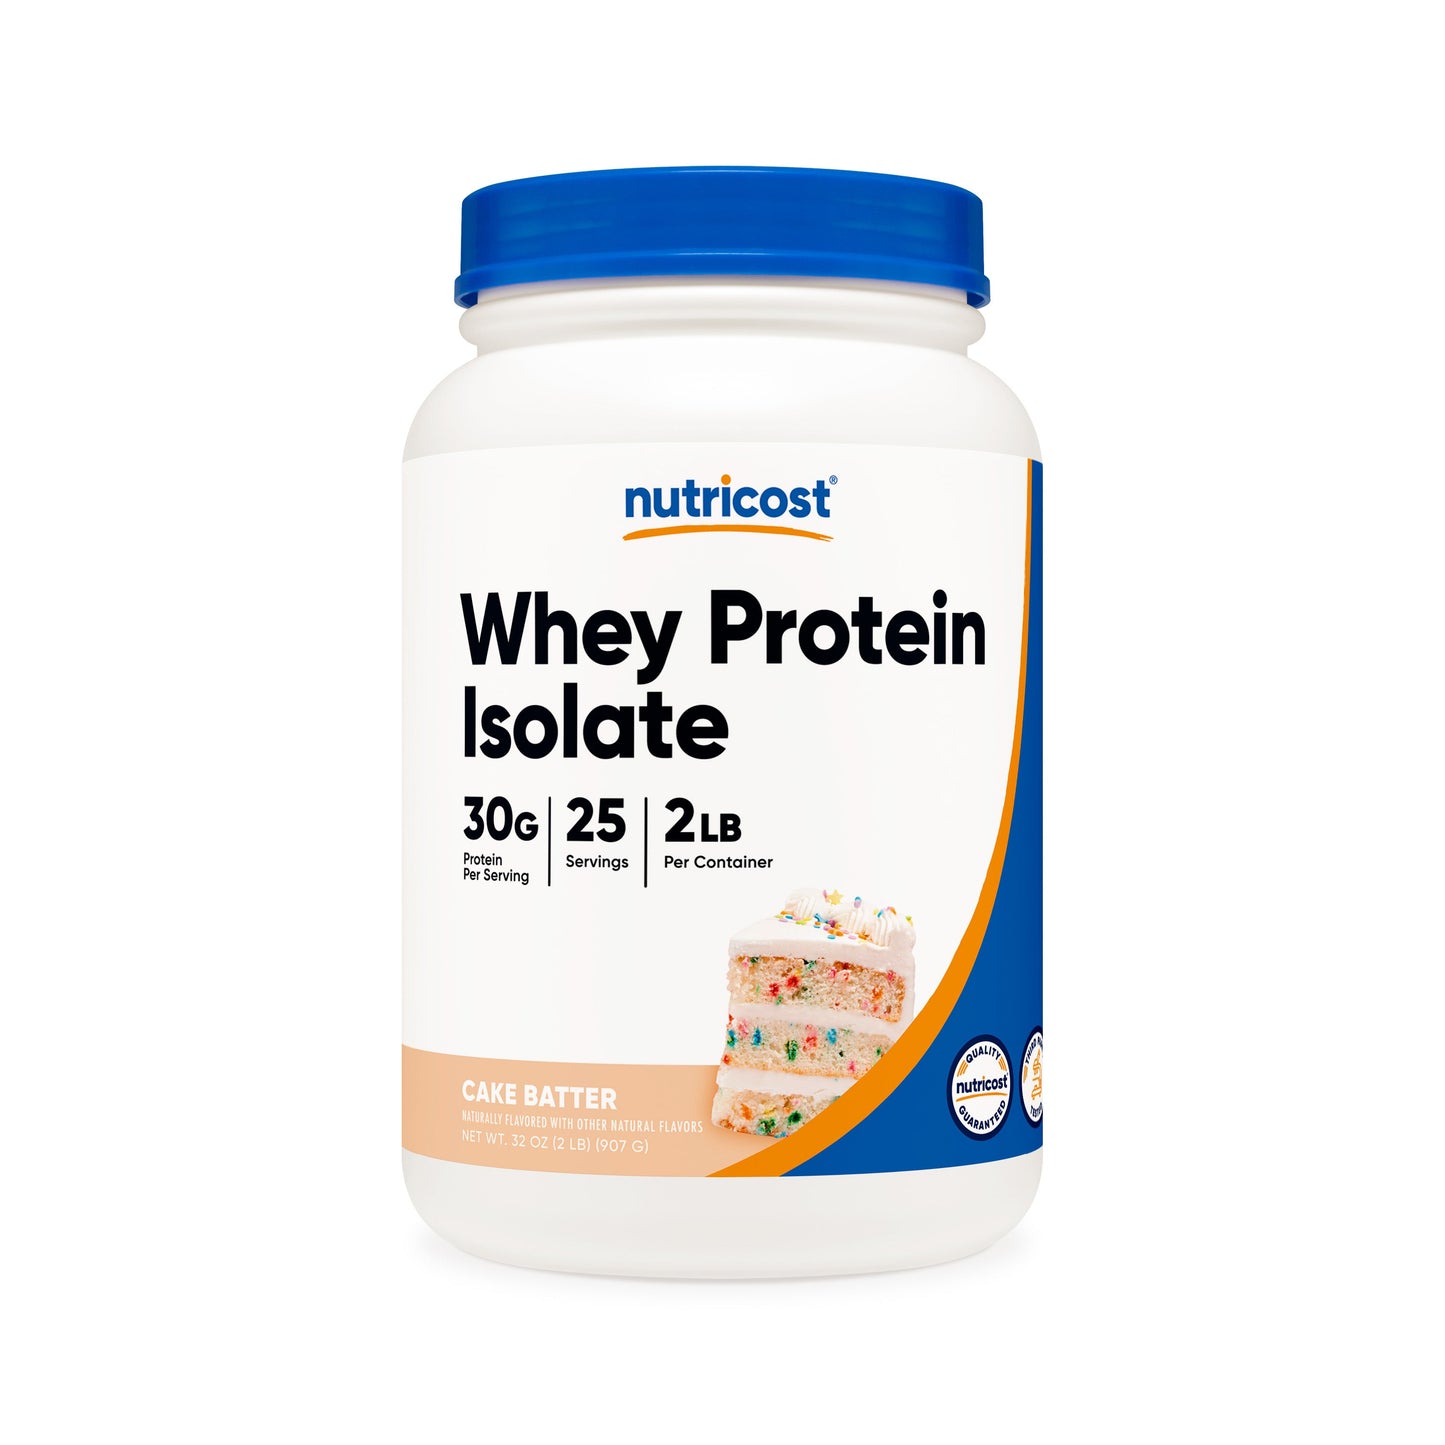 Nutricost Whey Protein Isolate Powder